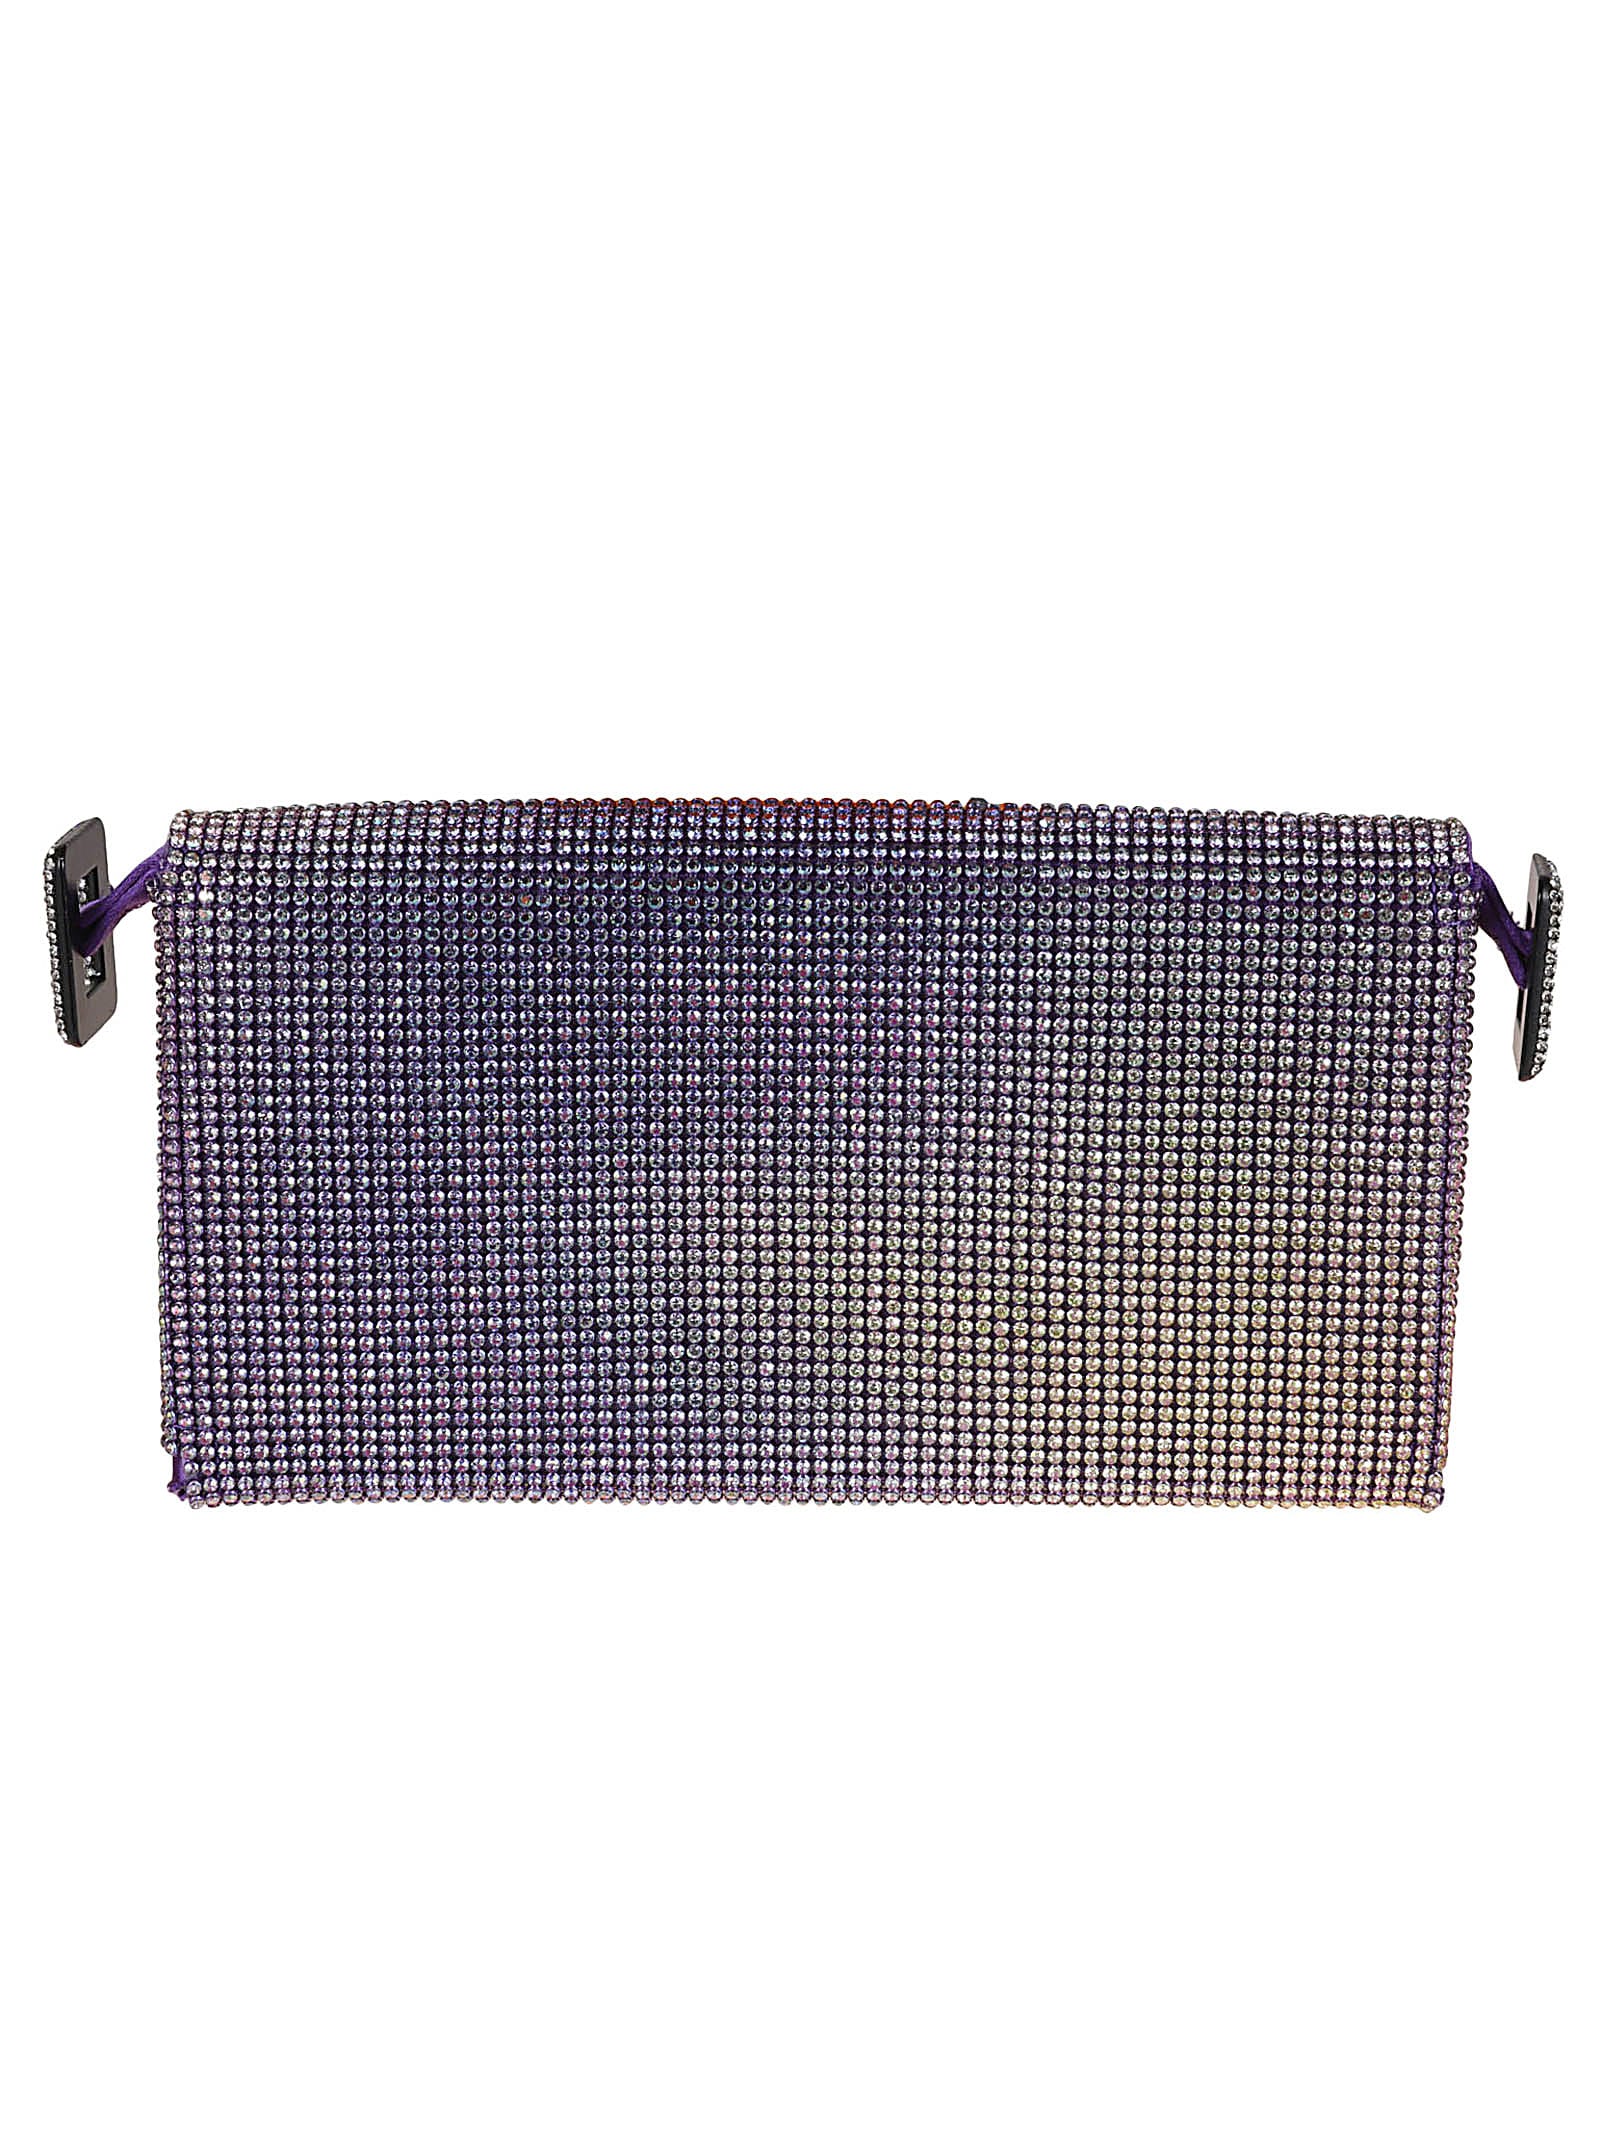 Shop Benedetta Bruzziches Embellished All-over Flap Shoulder Bag In The Living Daylight